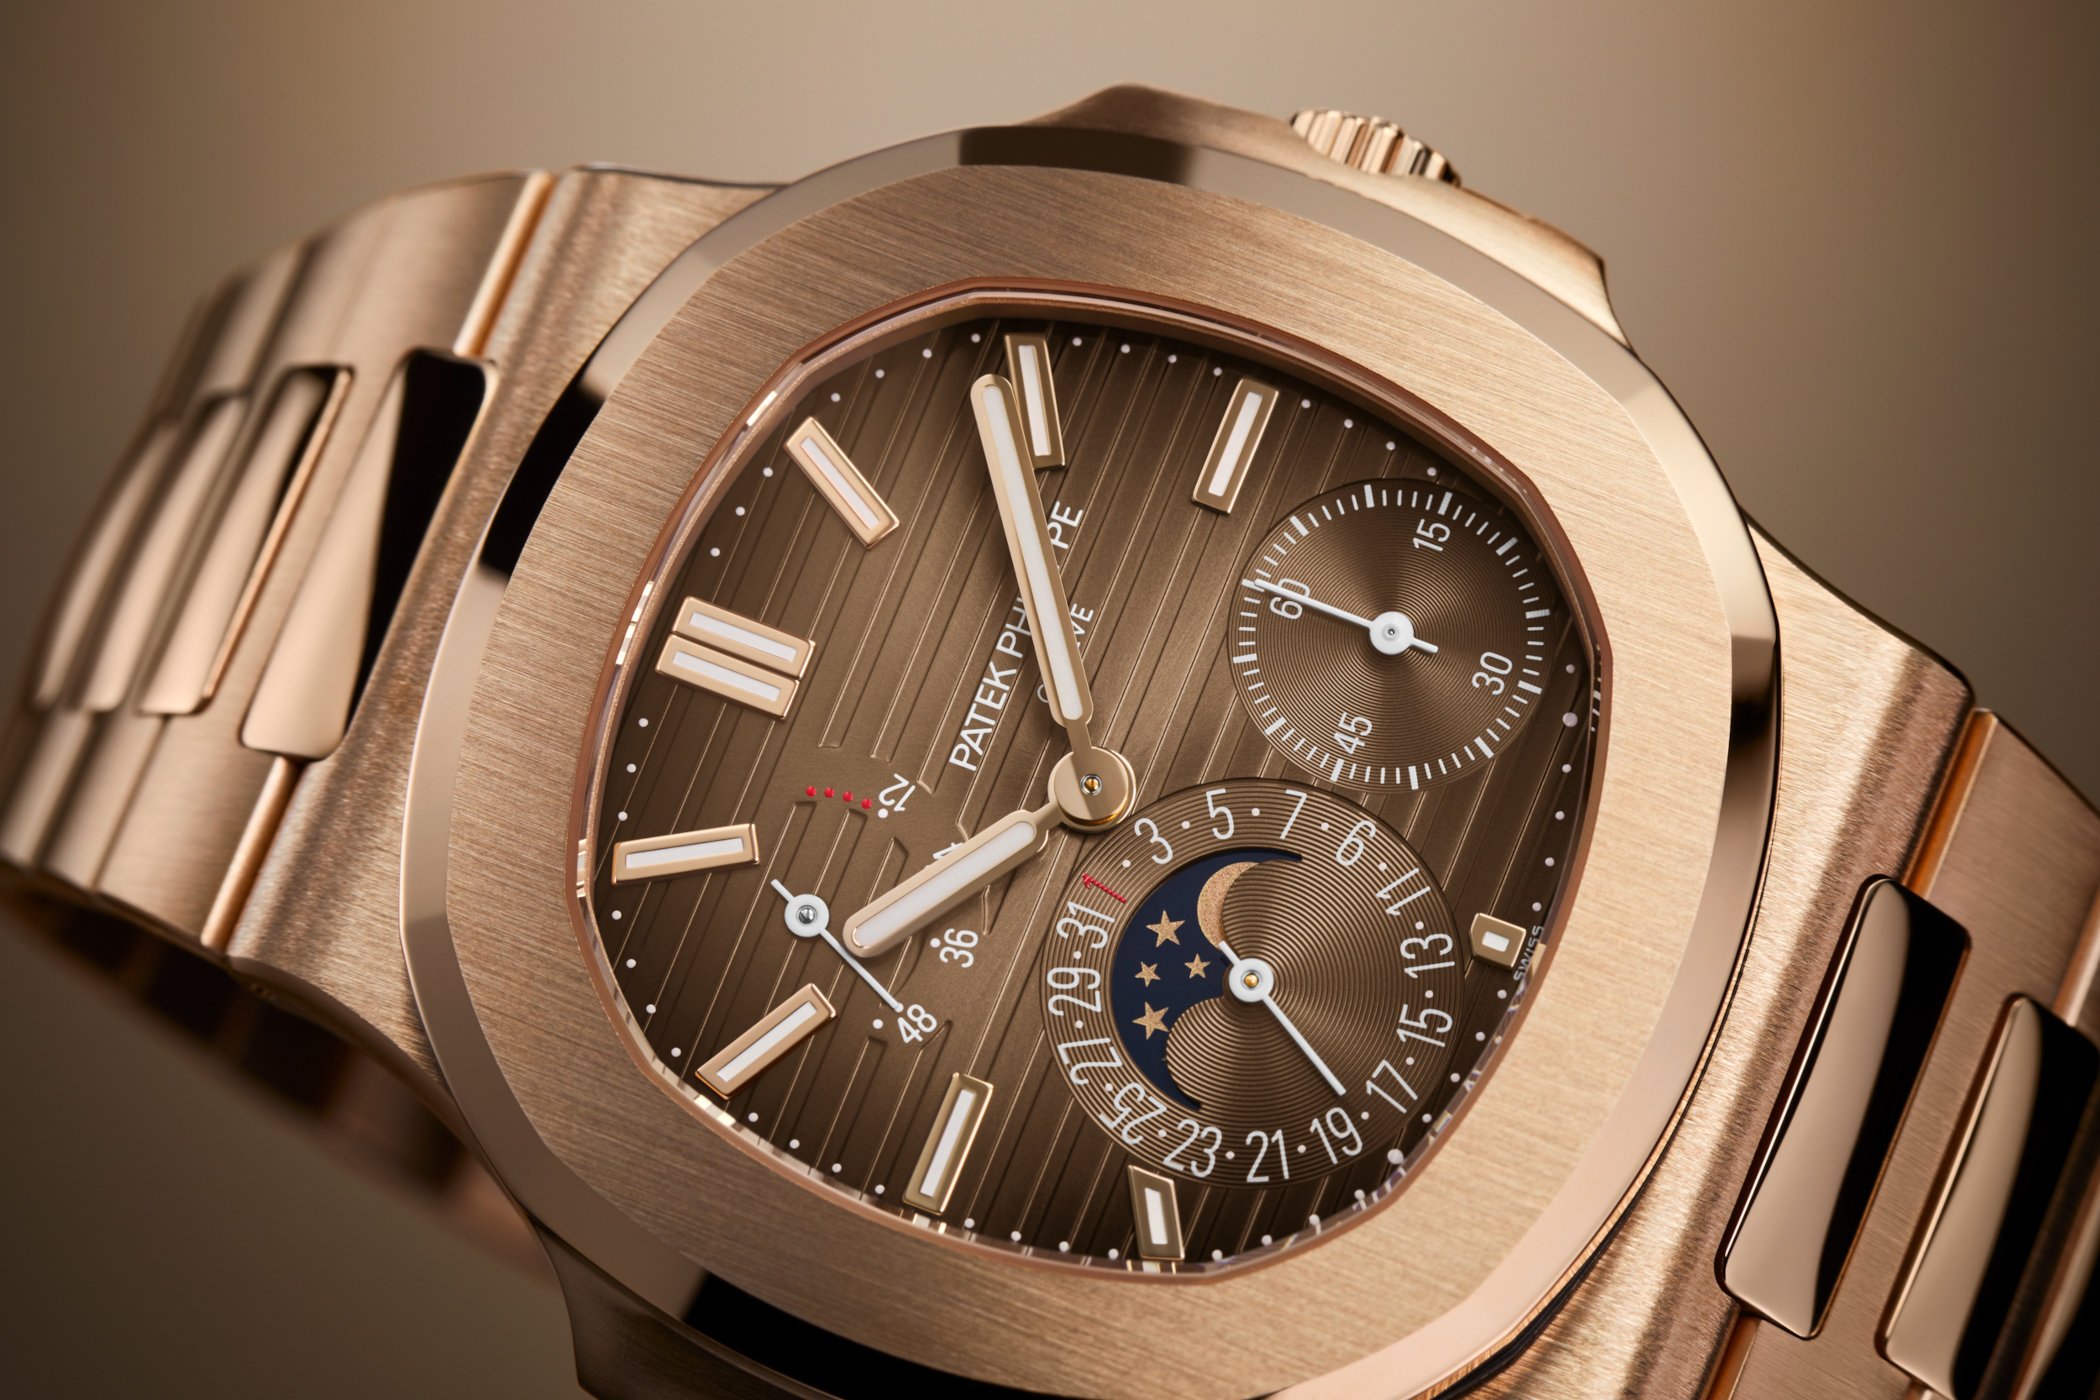 Introducing Patek Philippe introduces the 5712 in luxurious rose gold